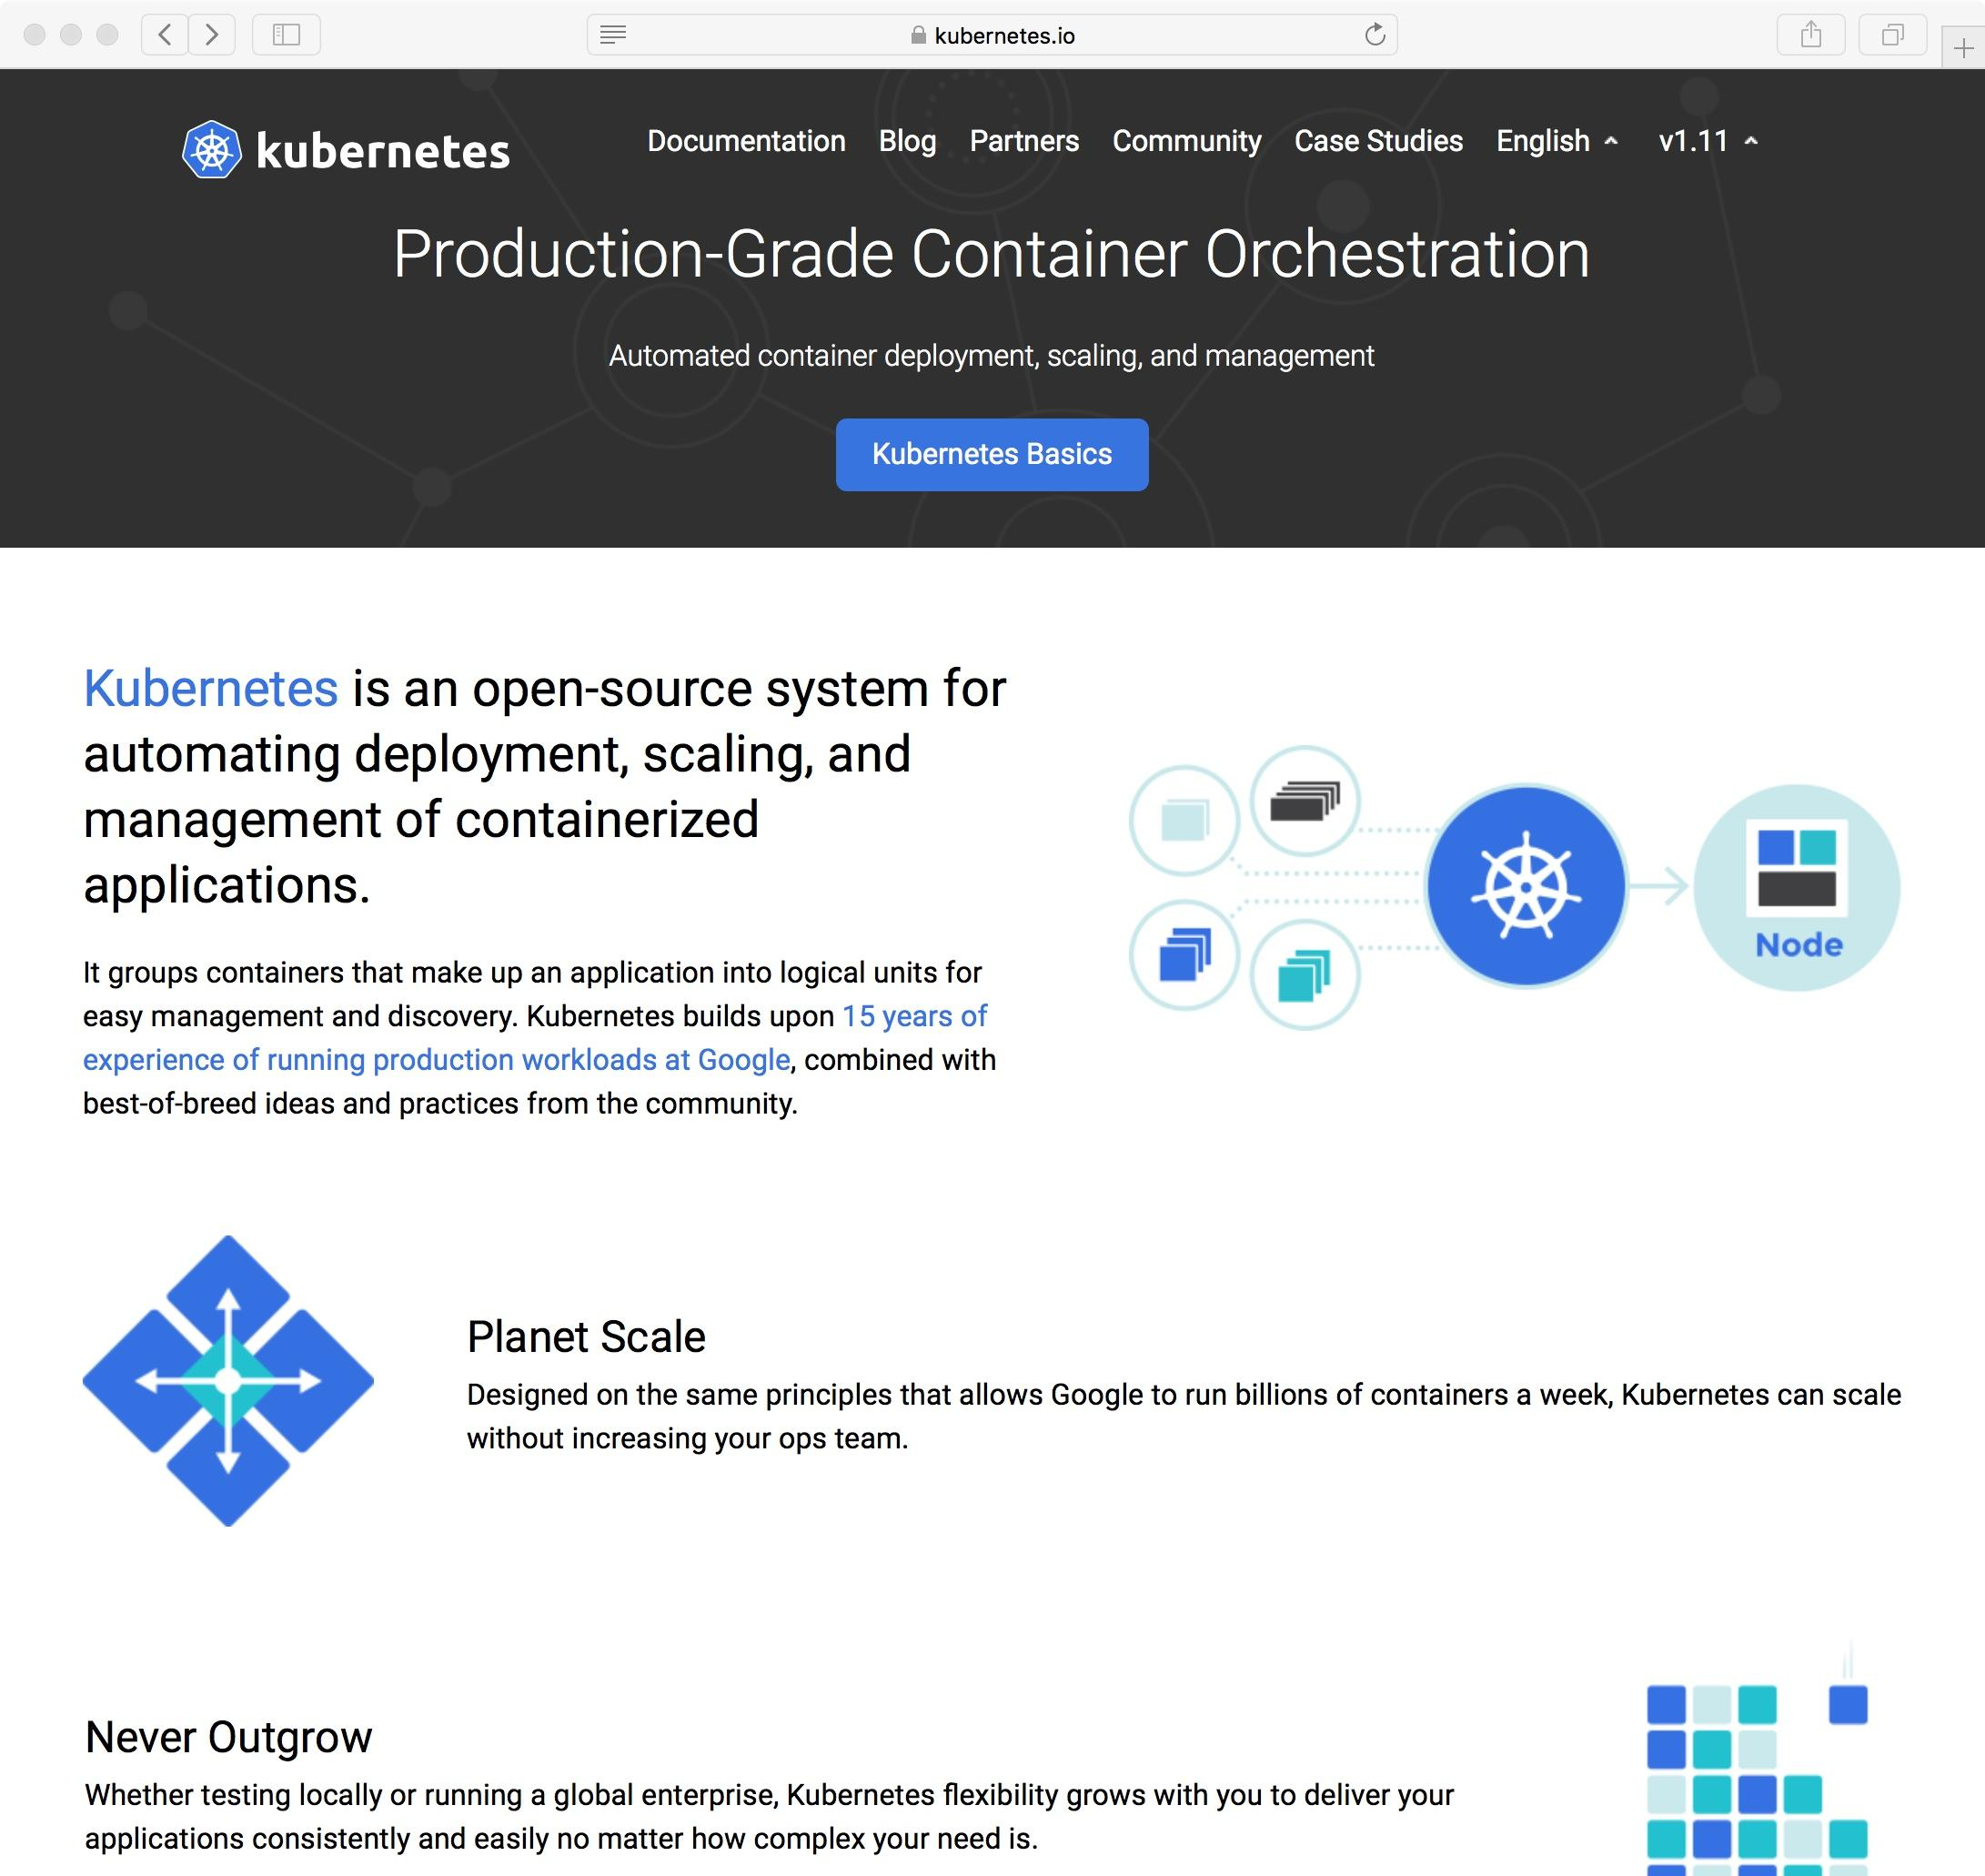 Kubernetes website home page.